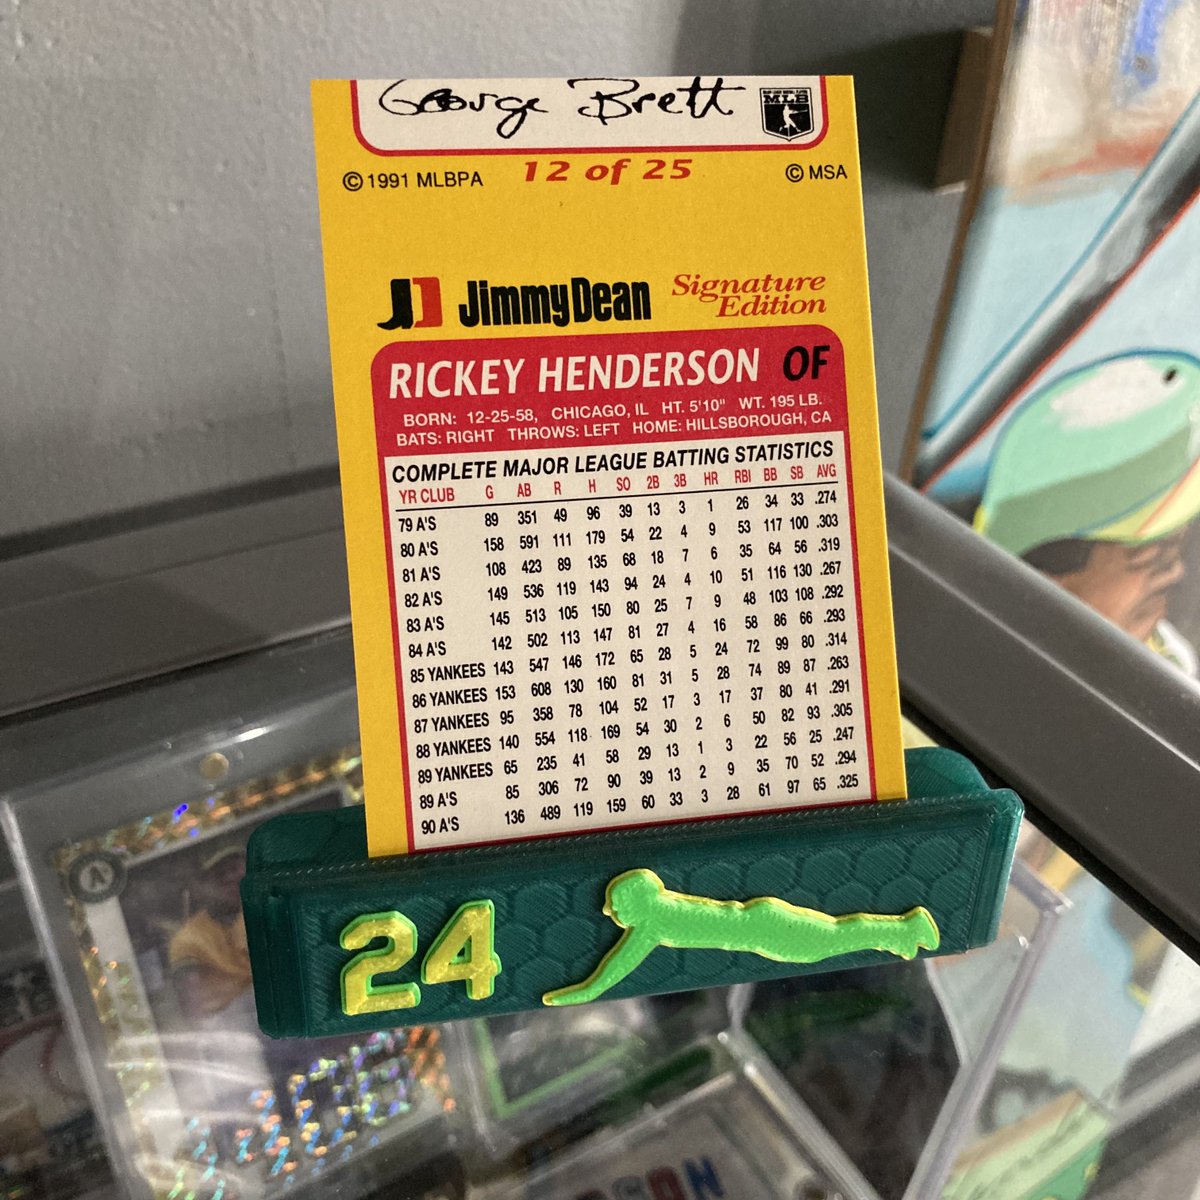 Todays Rickey Henderson PC swag is a fun #TBT to this miscut 1991 @JimmyDean “Signature Edition” card with George Brett. Living in KC, this one has all the nostalgic feels and makes me hungry for breakfast…@CardPurchaser 🔥💚👀🐐⚾️🏃🏿💨🧤#rickeyhenderson #thehobby